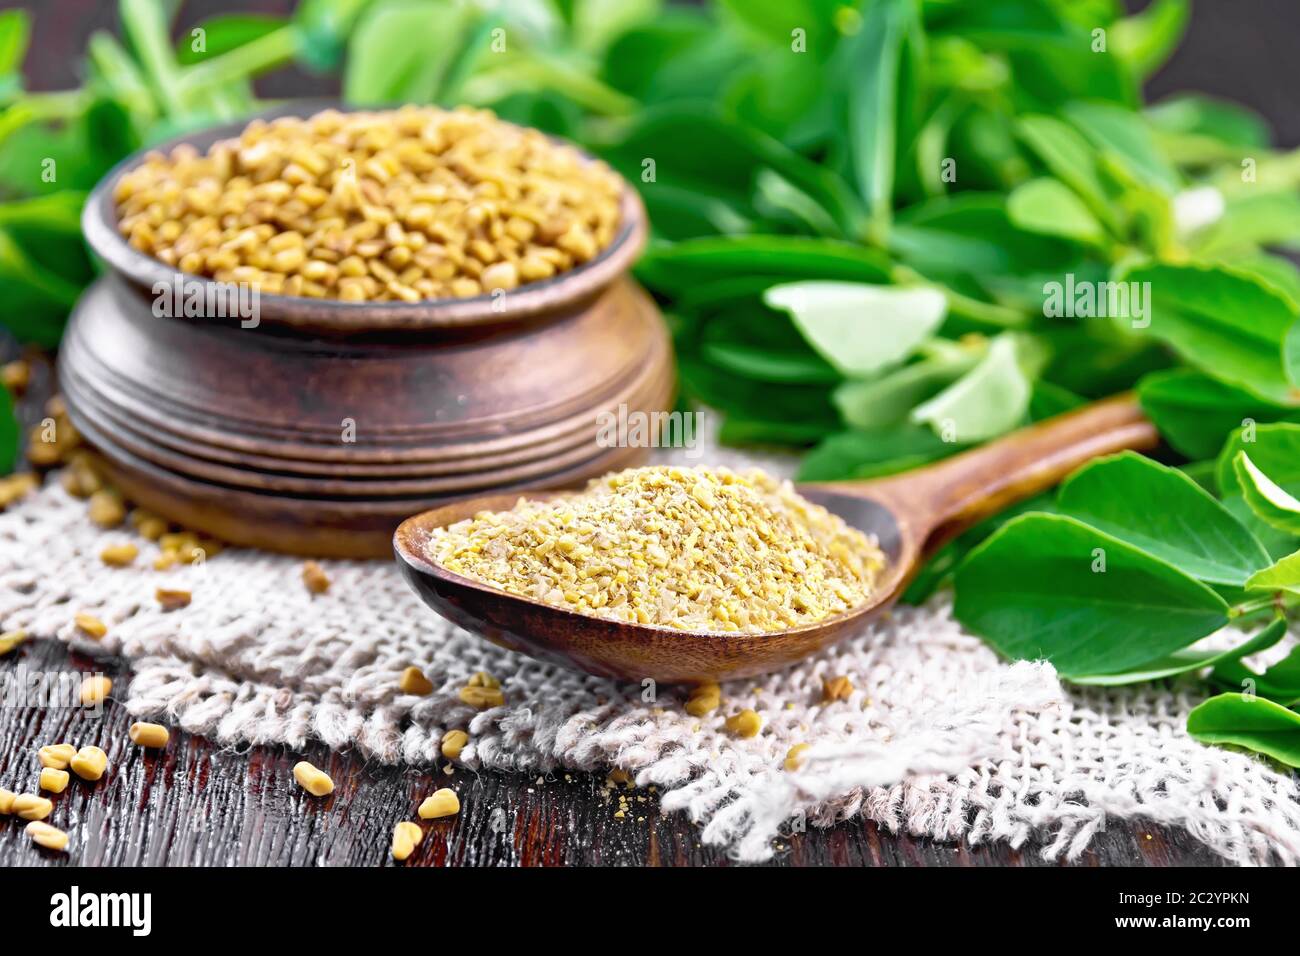 Ground fenugreek in a spoon and seeds in a bowl on burlap with green leaves against dark wooden board Stock Photo